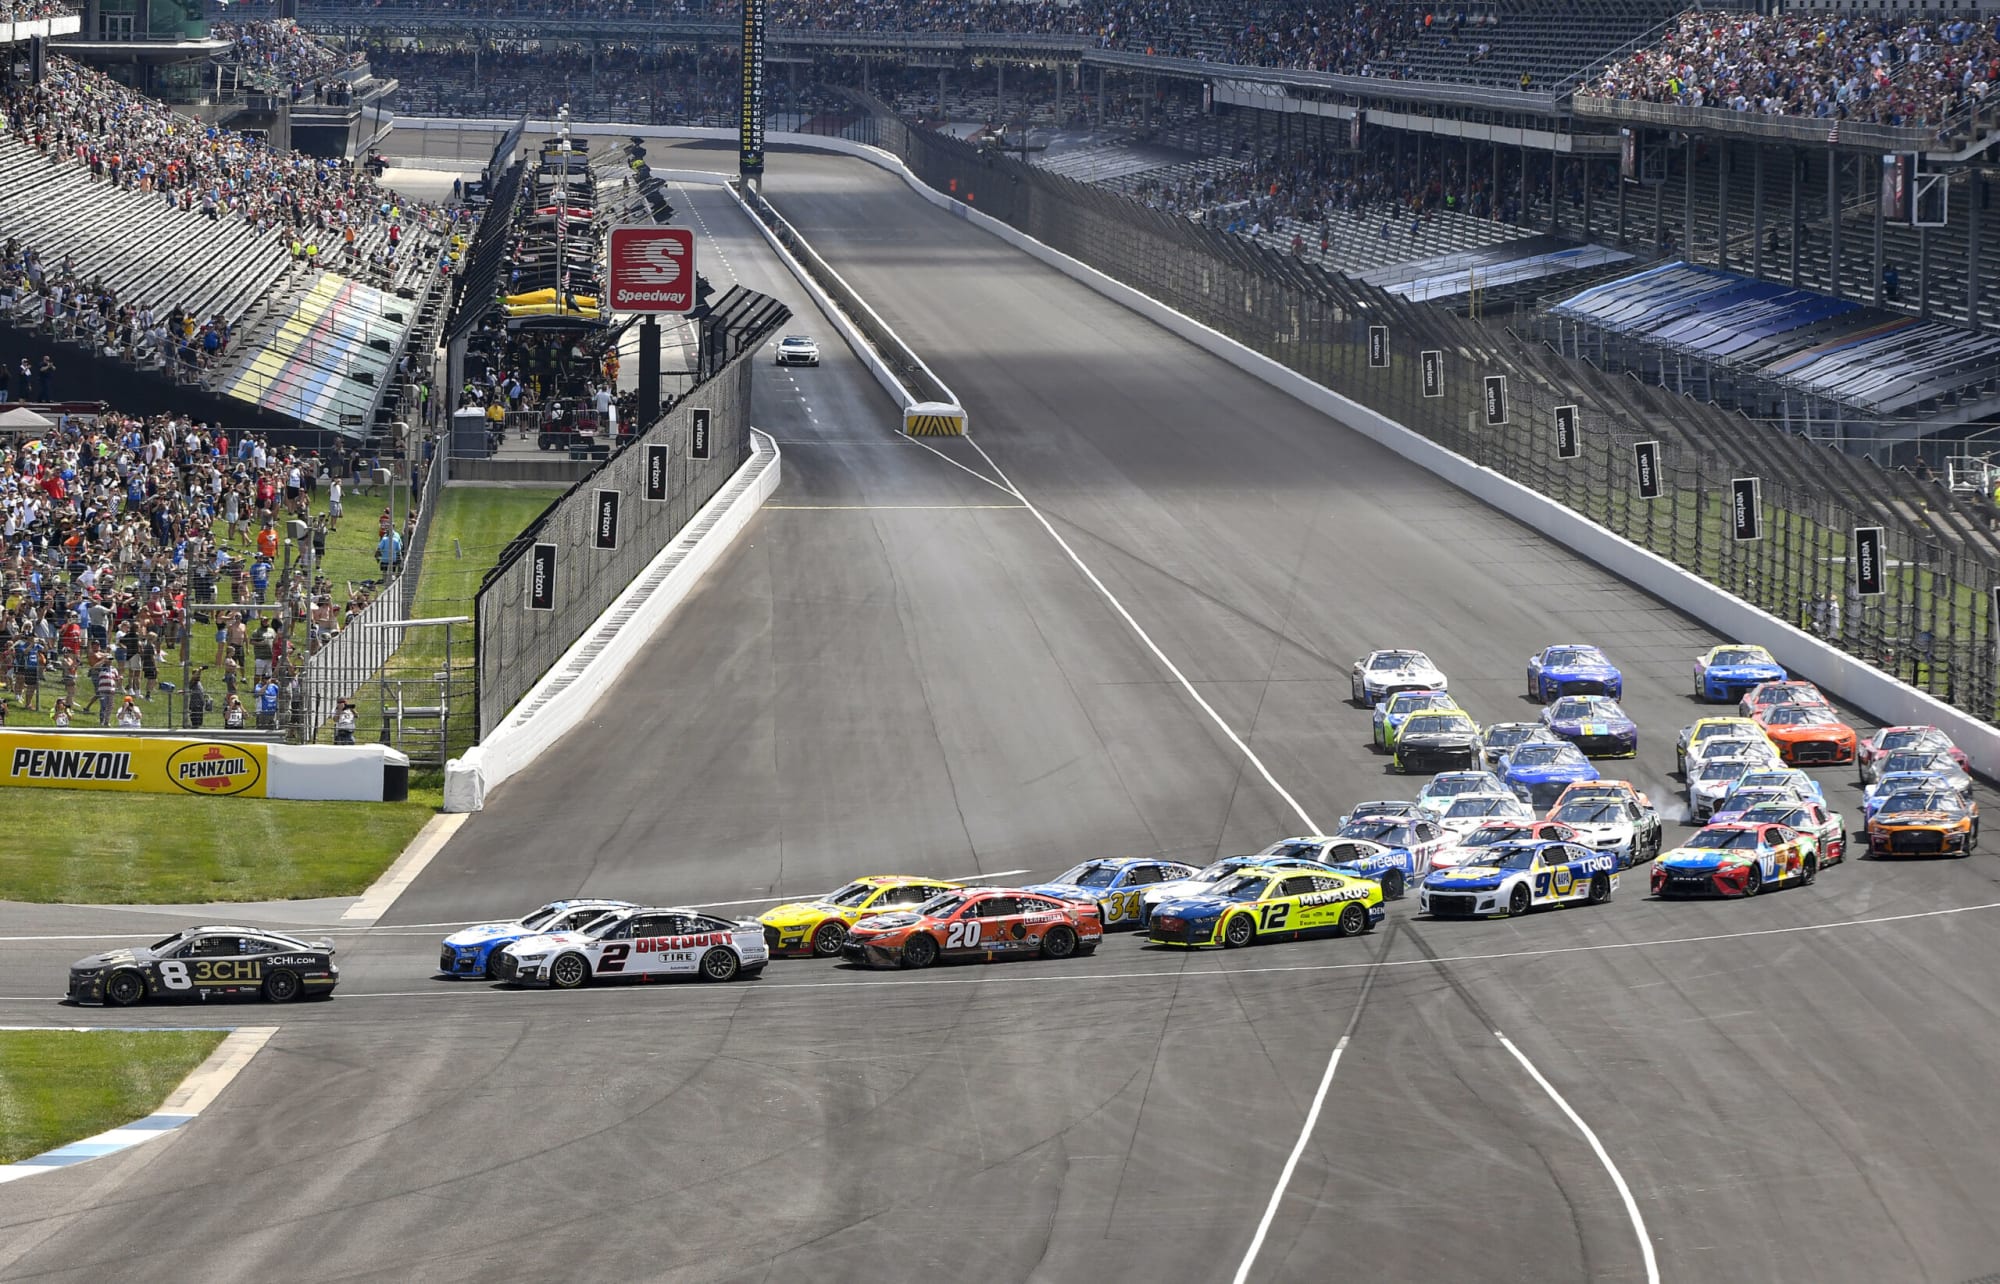 NBC to broadcast upcoming NASCAR Cup Series race at Indianapolis Motor Speedway